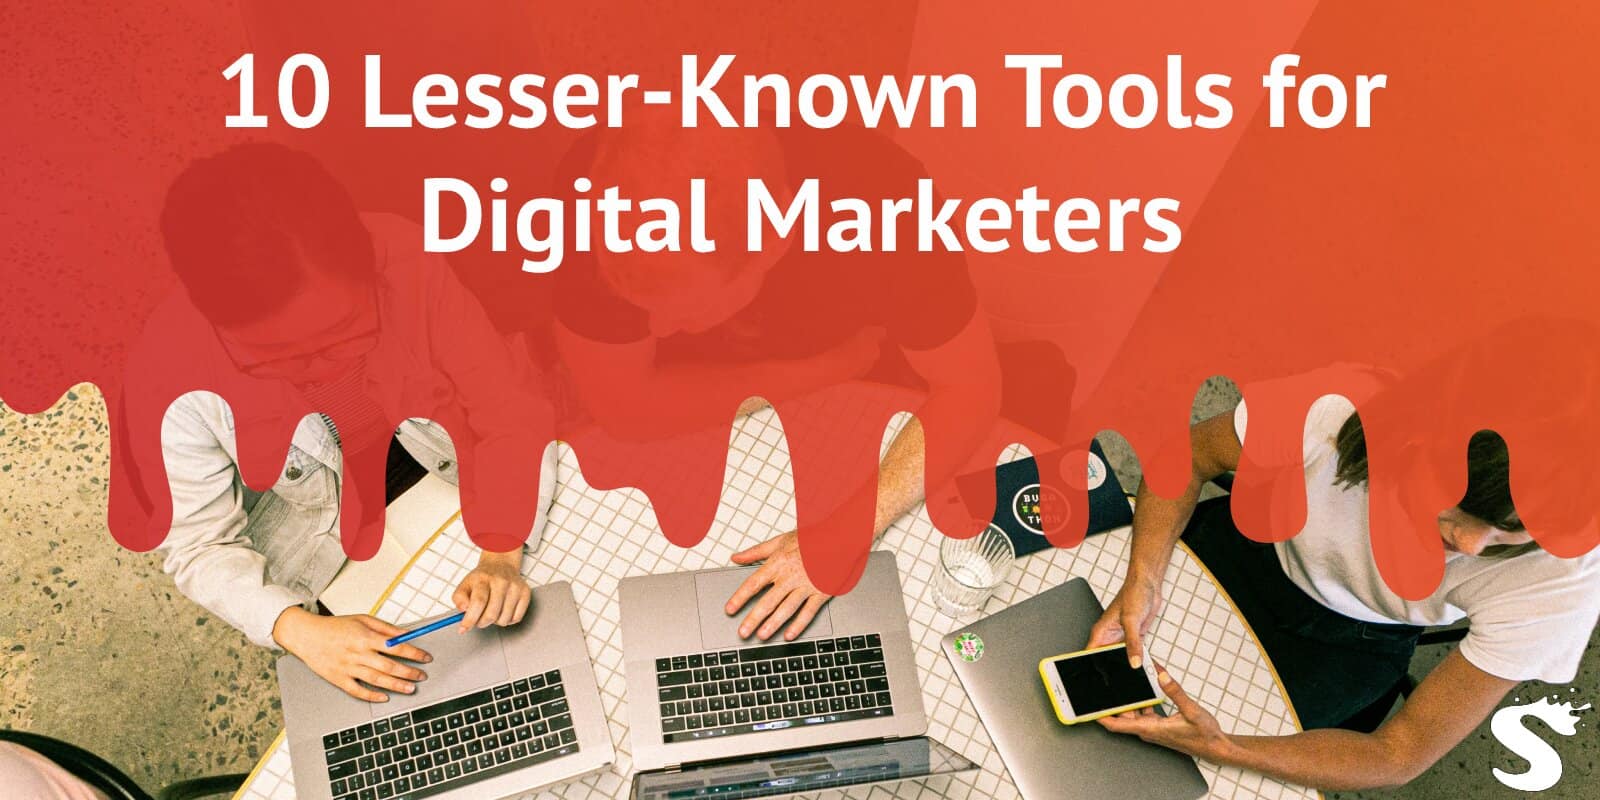 10 Lesser-Known Tools for Digital Marketers